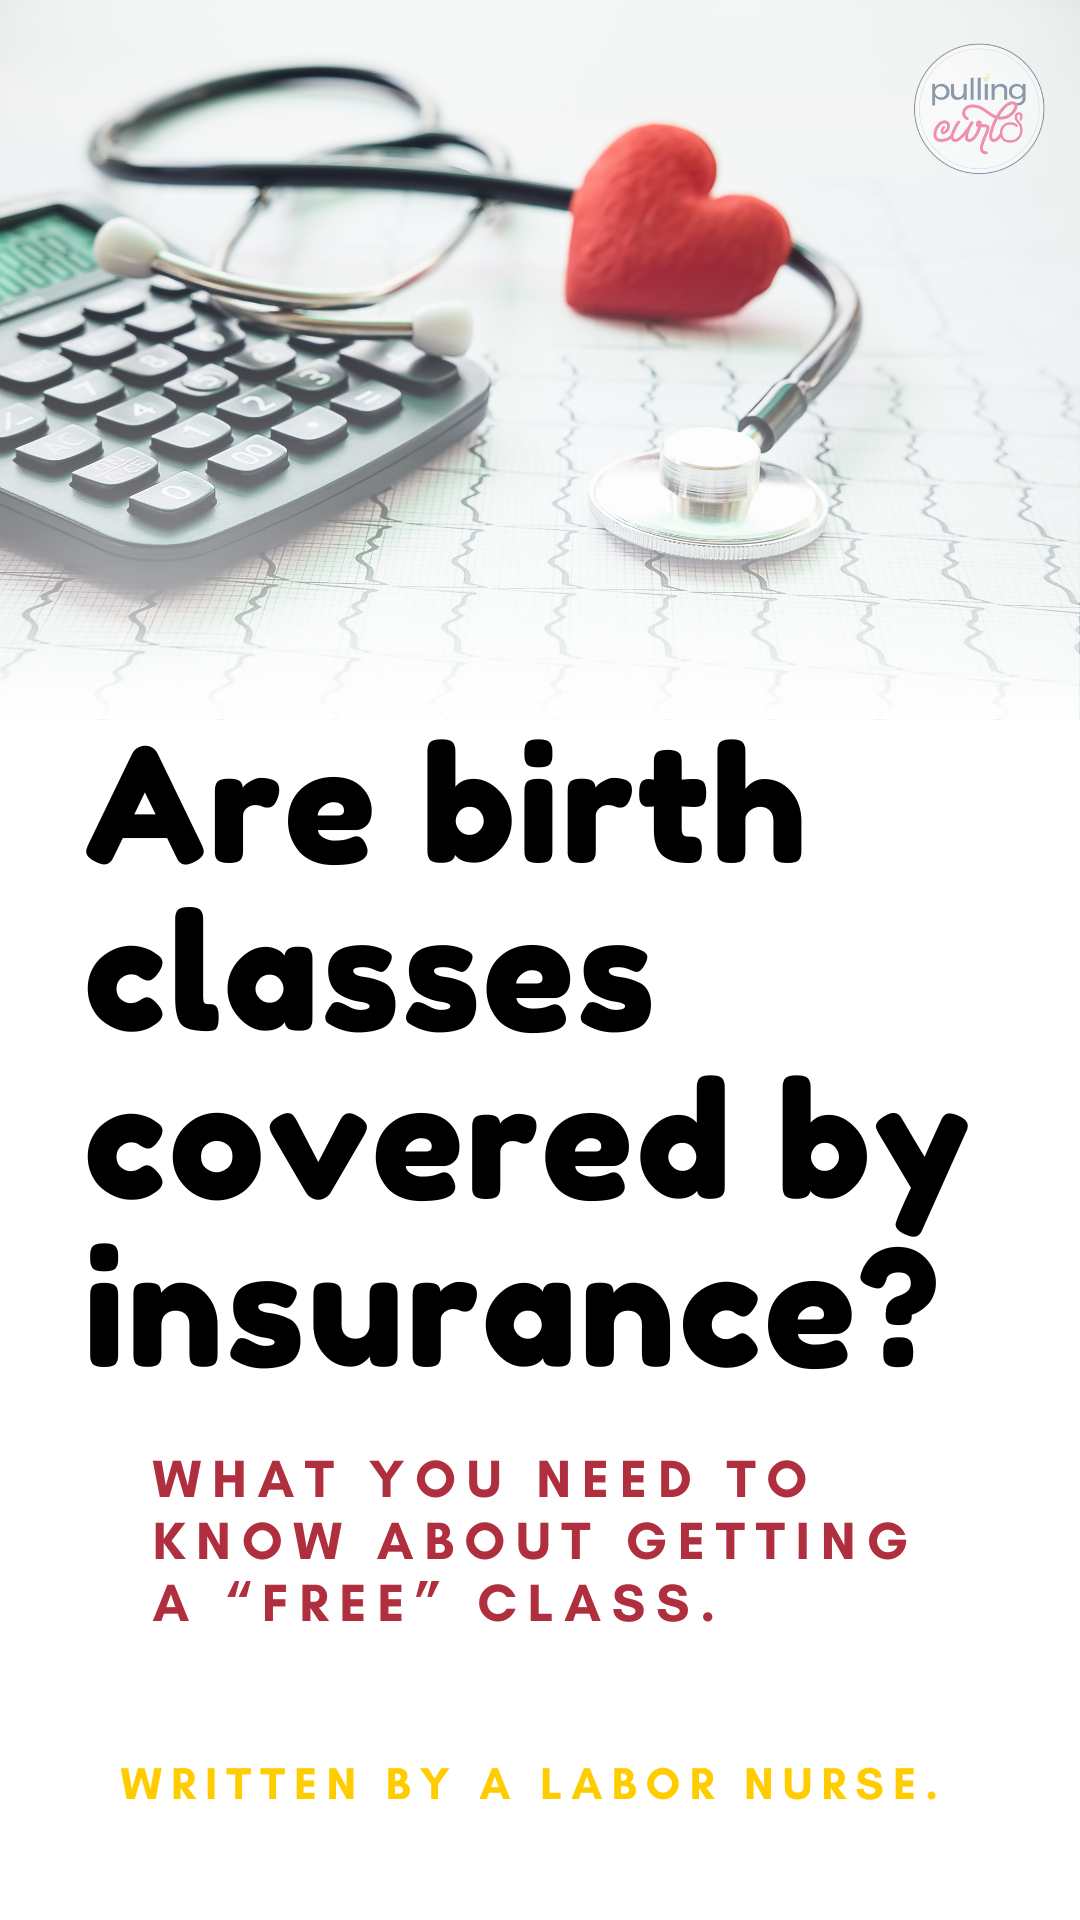 "Discover the benefits of health insurance covering your birth class expenses! Ensure a smooth journey into parenthood with our comprehensive birth classes, supported by your health insurance. Embrace the joy of learning and preparing for parenthood, all while enjoying the financial security provided by your health coverage. Don't miss out on this opportunity to invest in your family's well-being with the support of your health insurance plan. #HealthInsurance #BirthClass #ParenthoodPrep via @pullingcurls